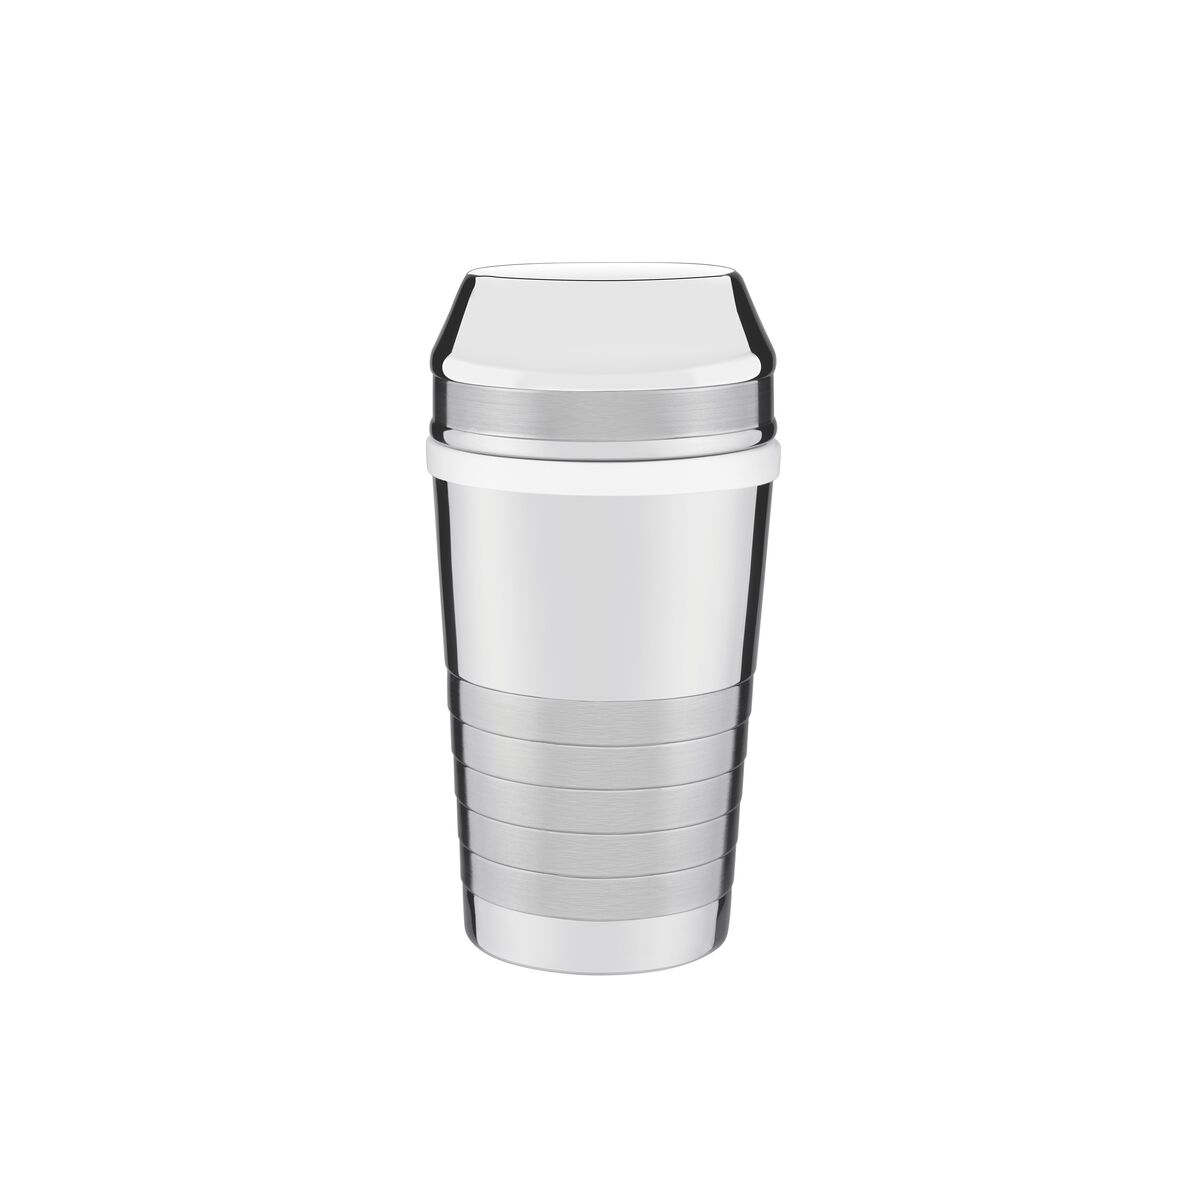 Tramontina Millenium 680 ml stainless steel cocktail shaker with detailing in matte finish